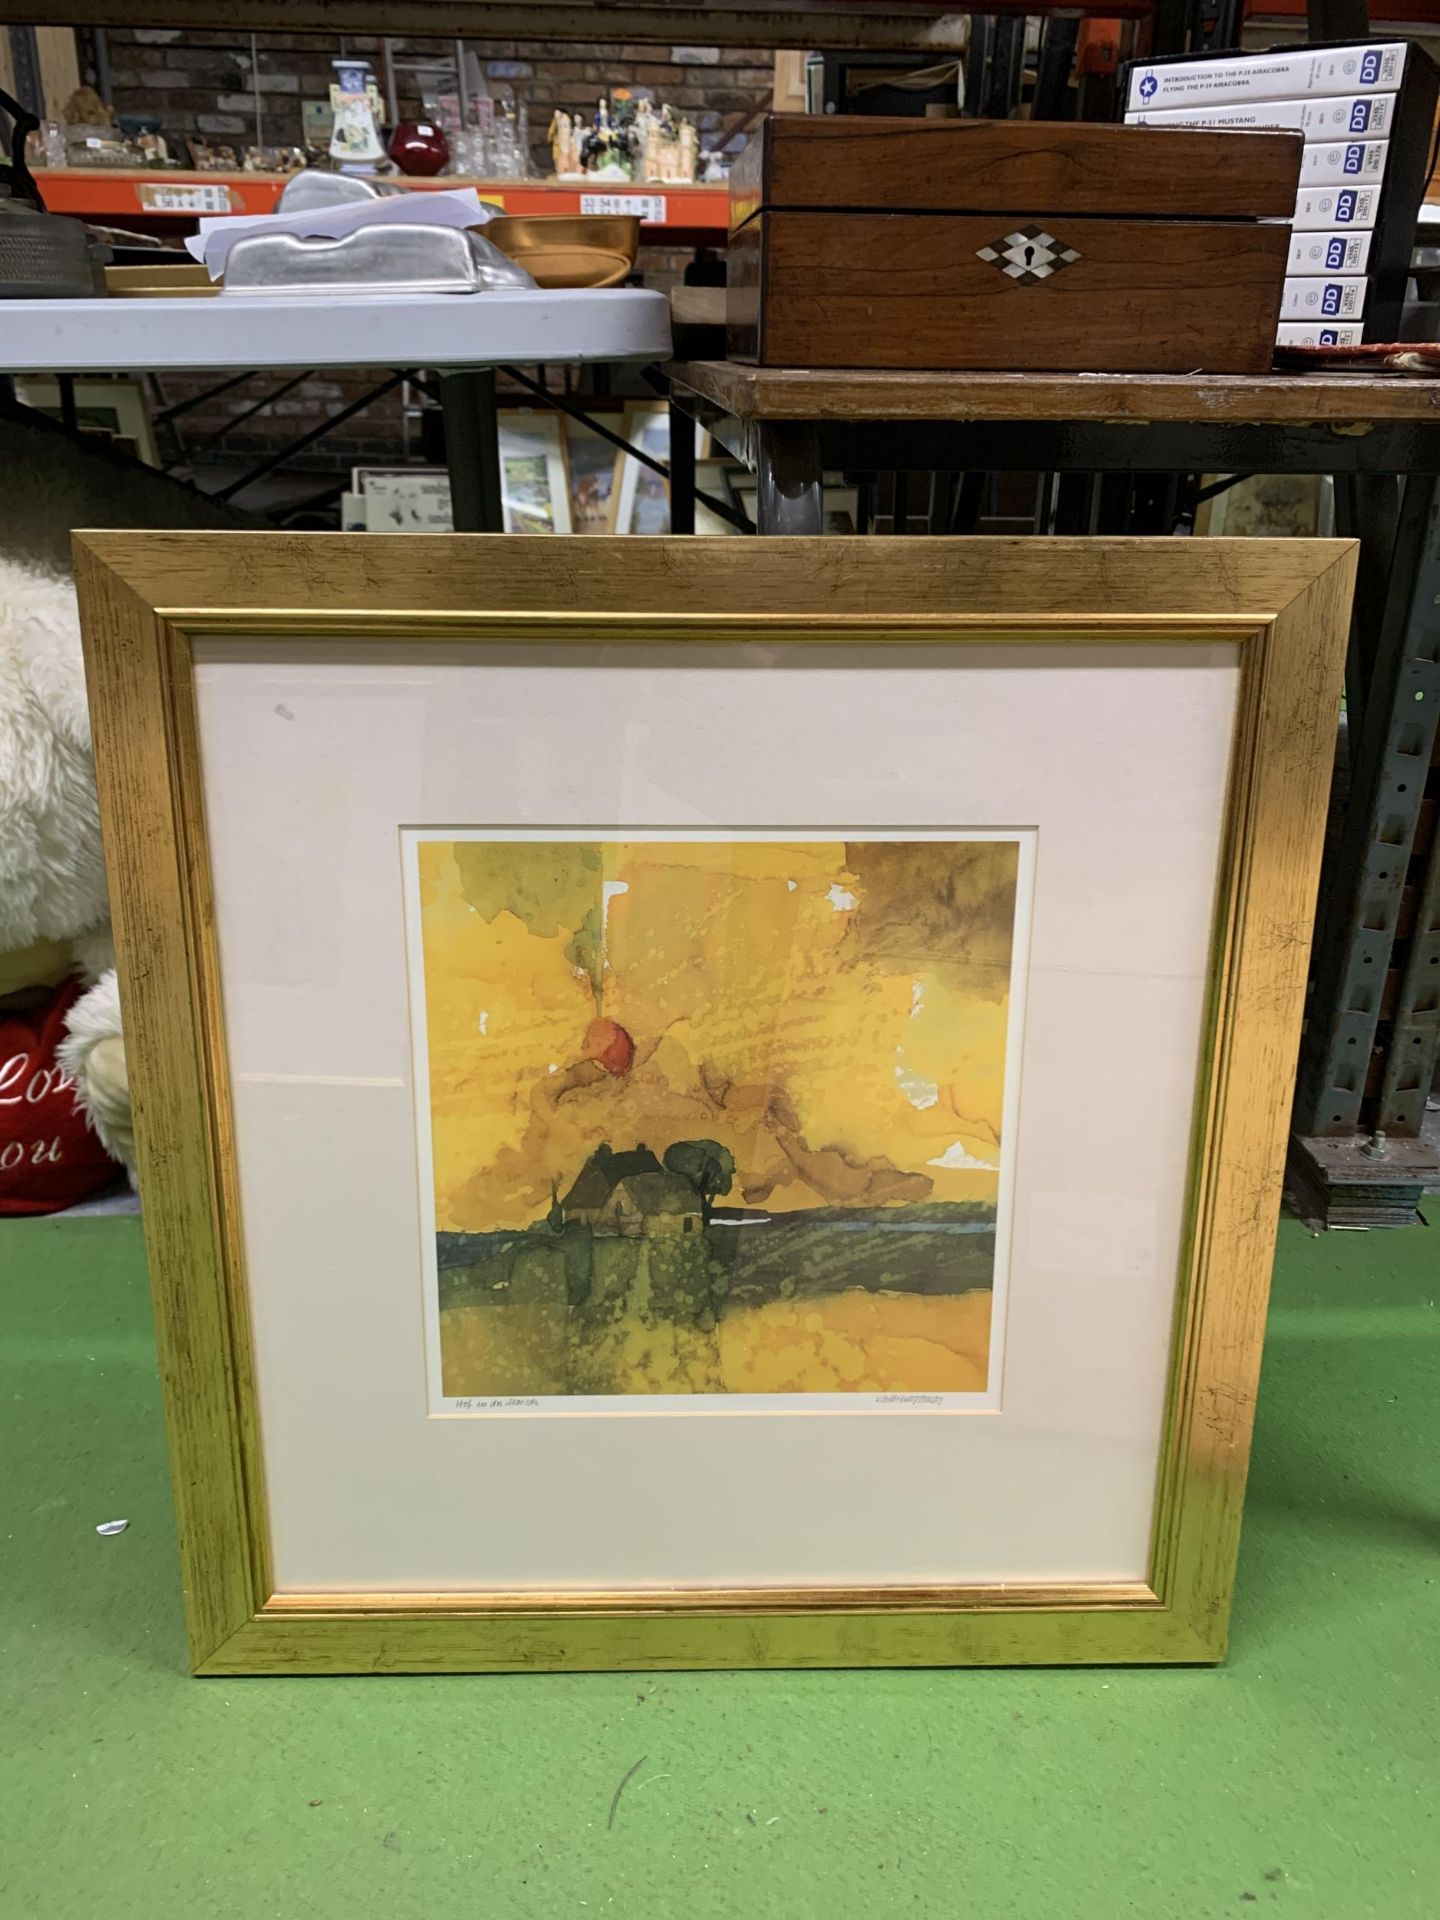 TWO GILT FRAMED PRINTS OF A WINDMILL AND RURAL SCENE - Image 3 of 3